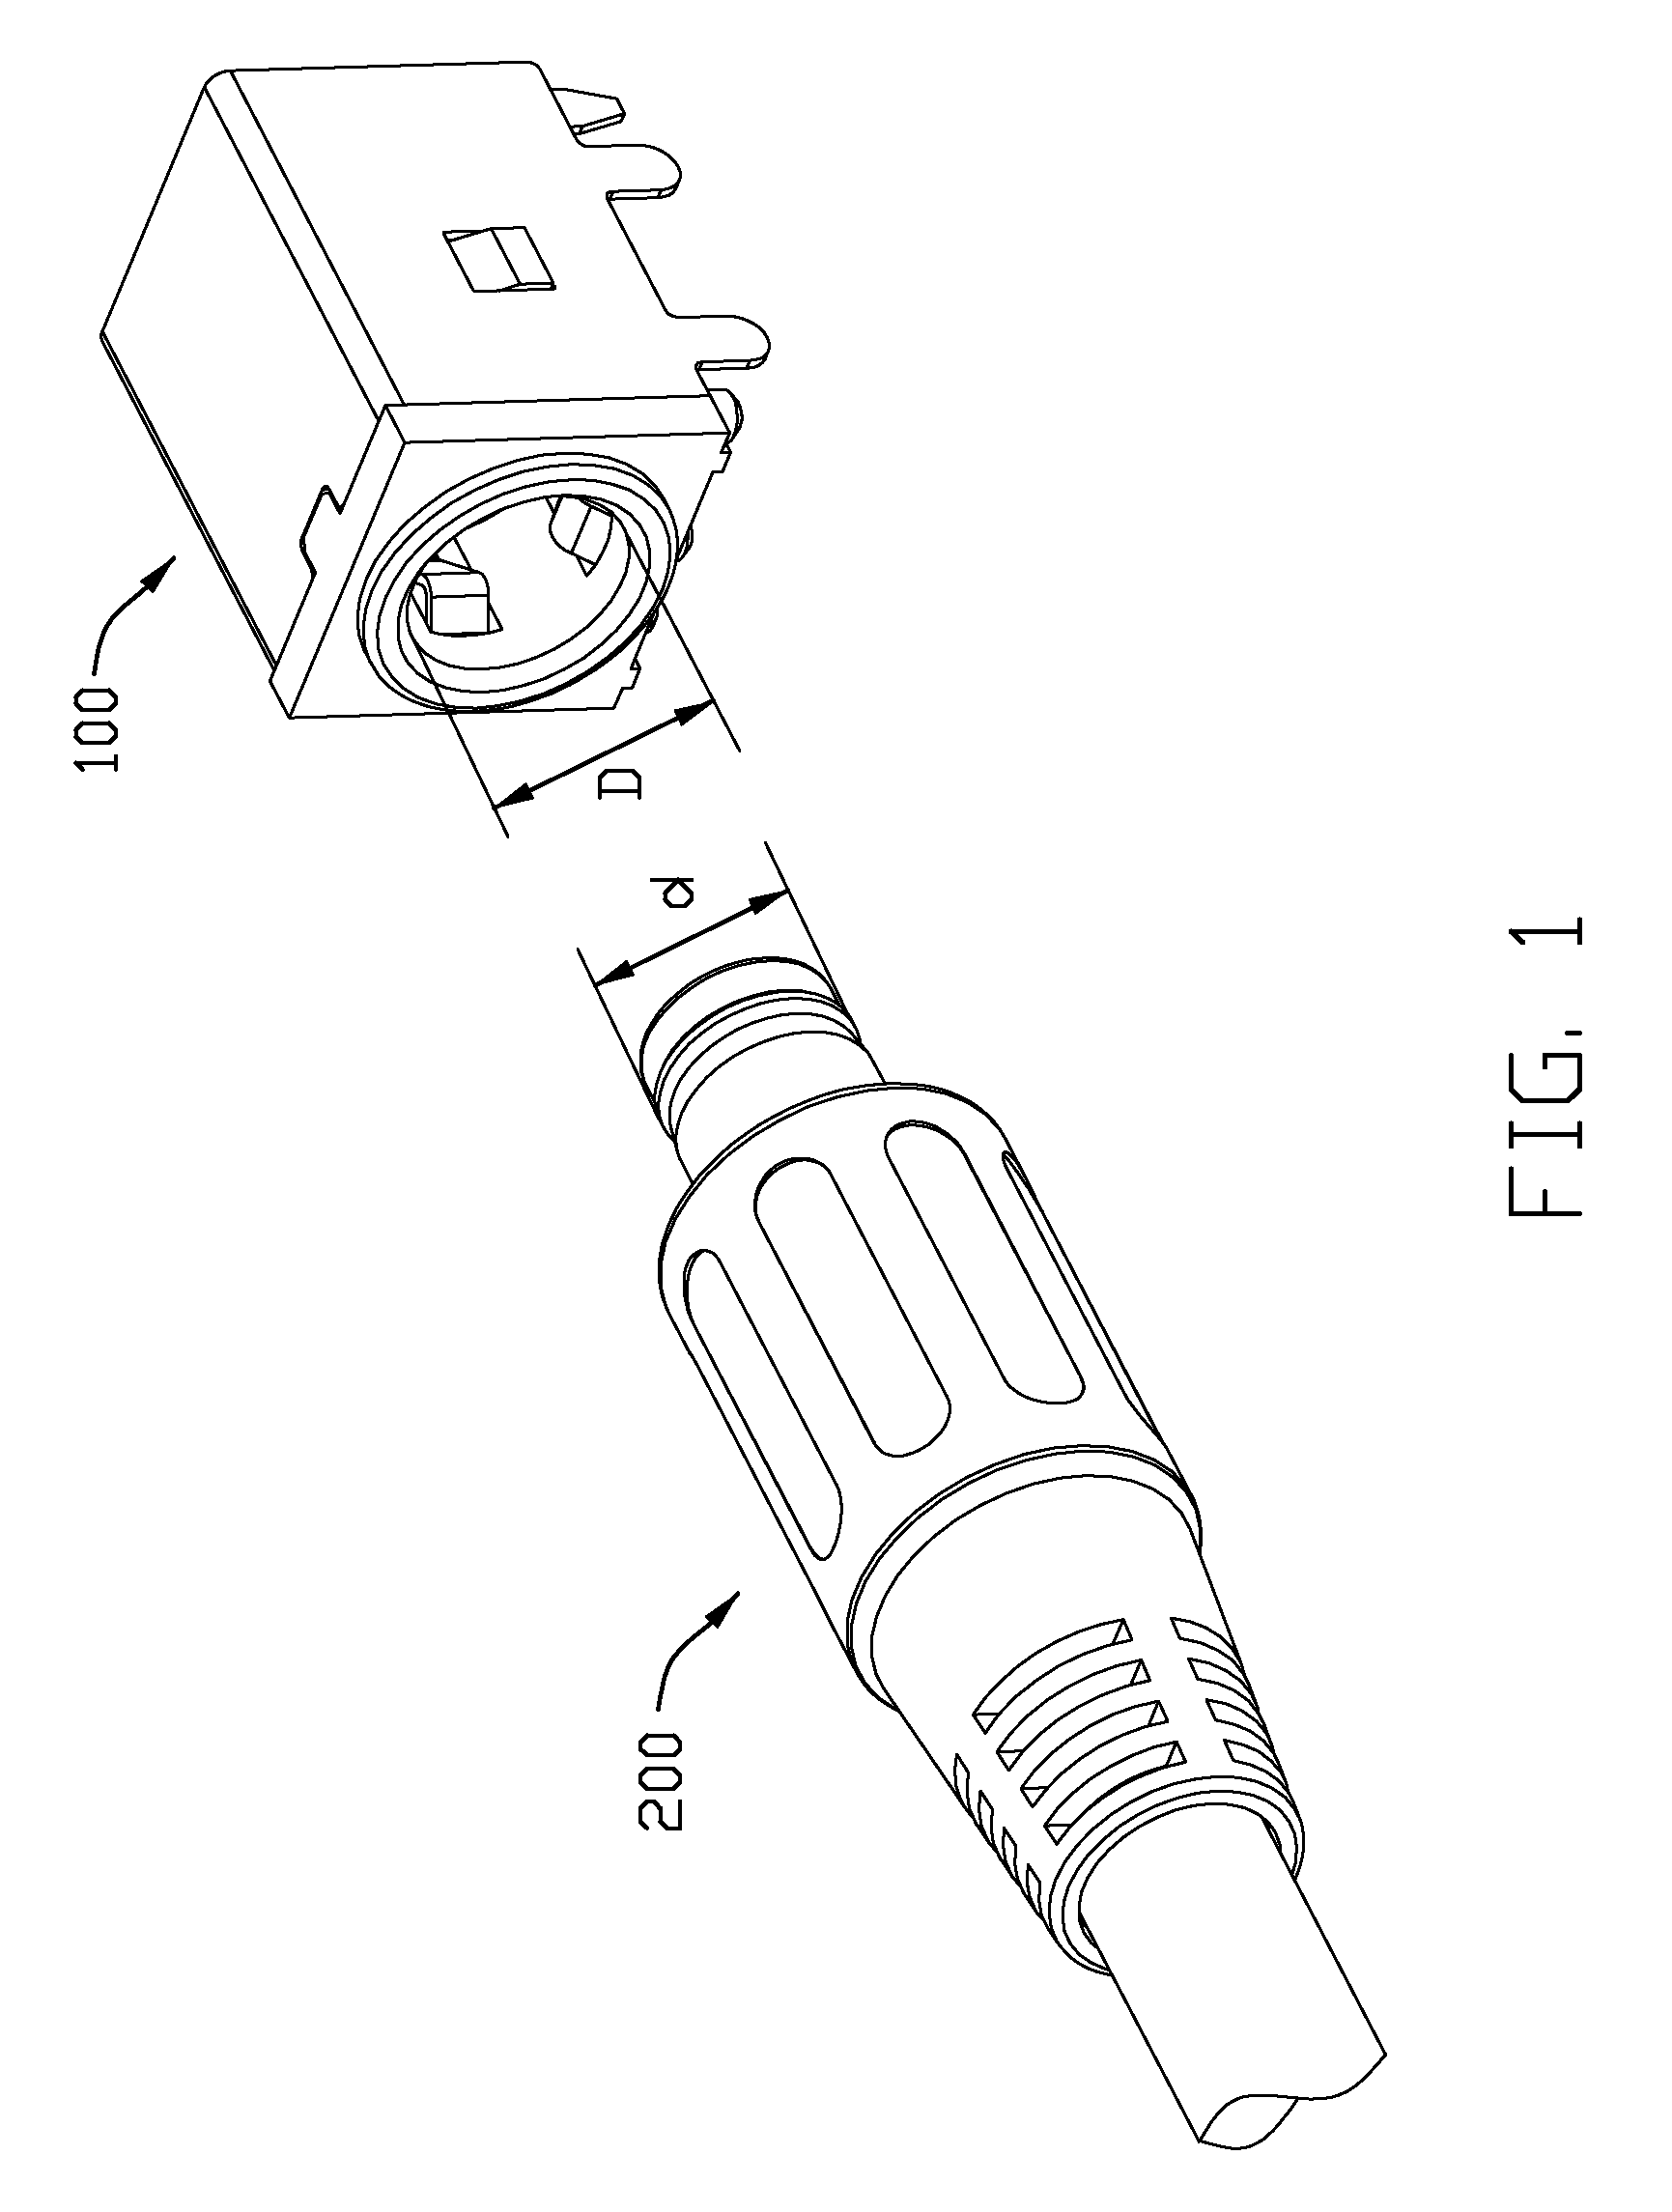 Connector assembly featured head-to-head mating interconnection and quick-disconnection therefrom